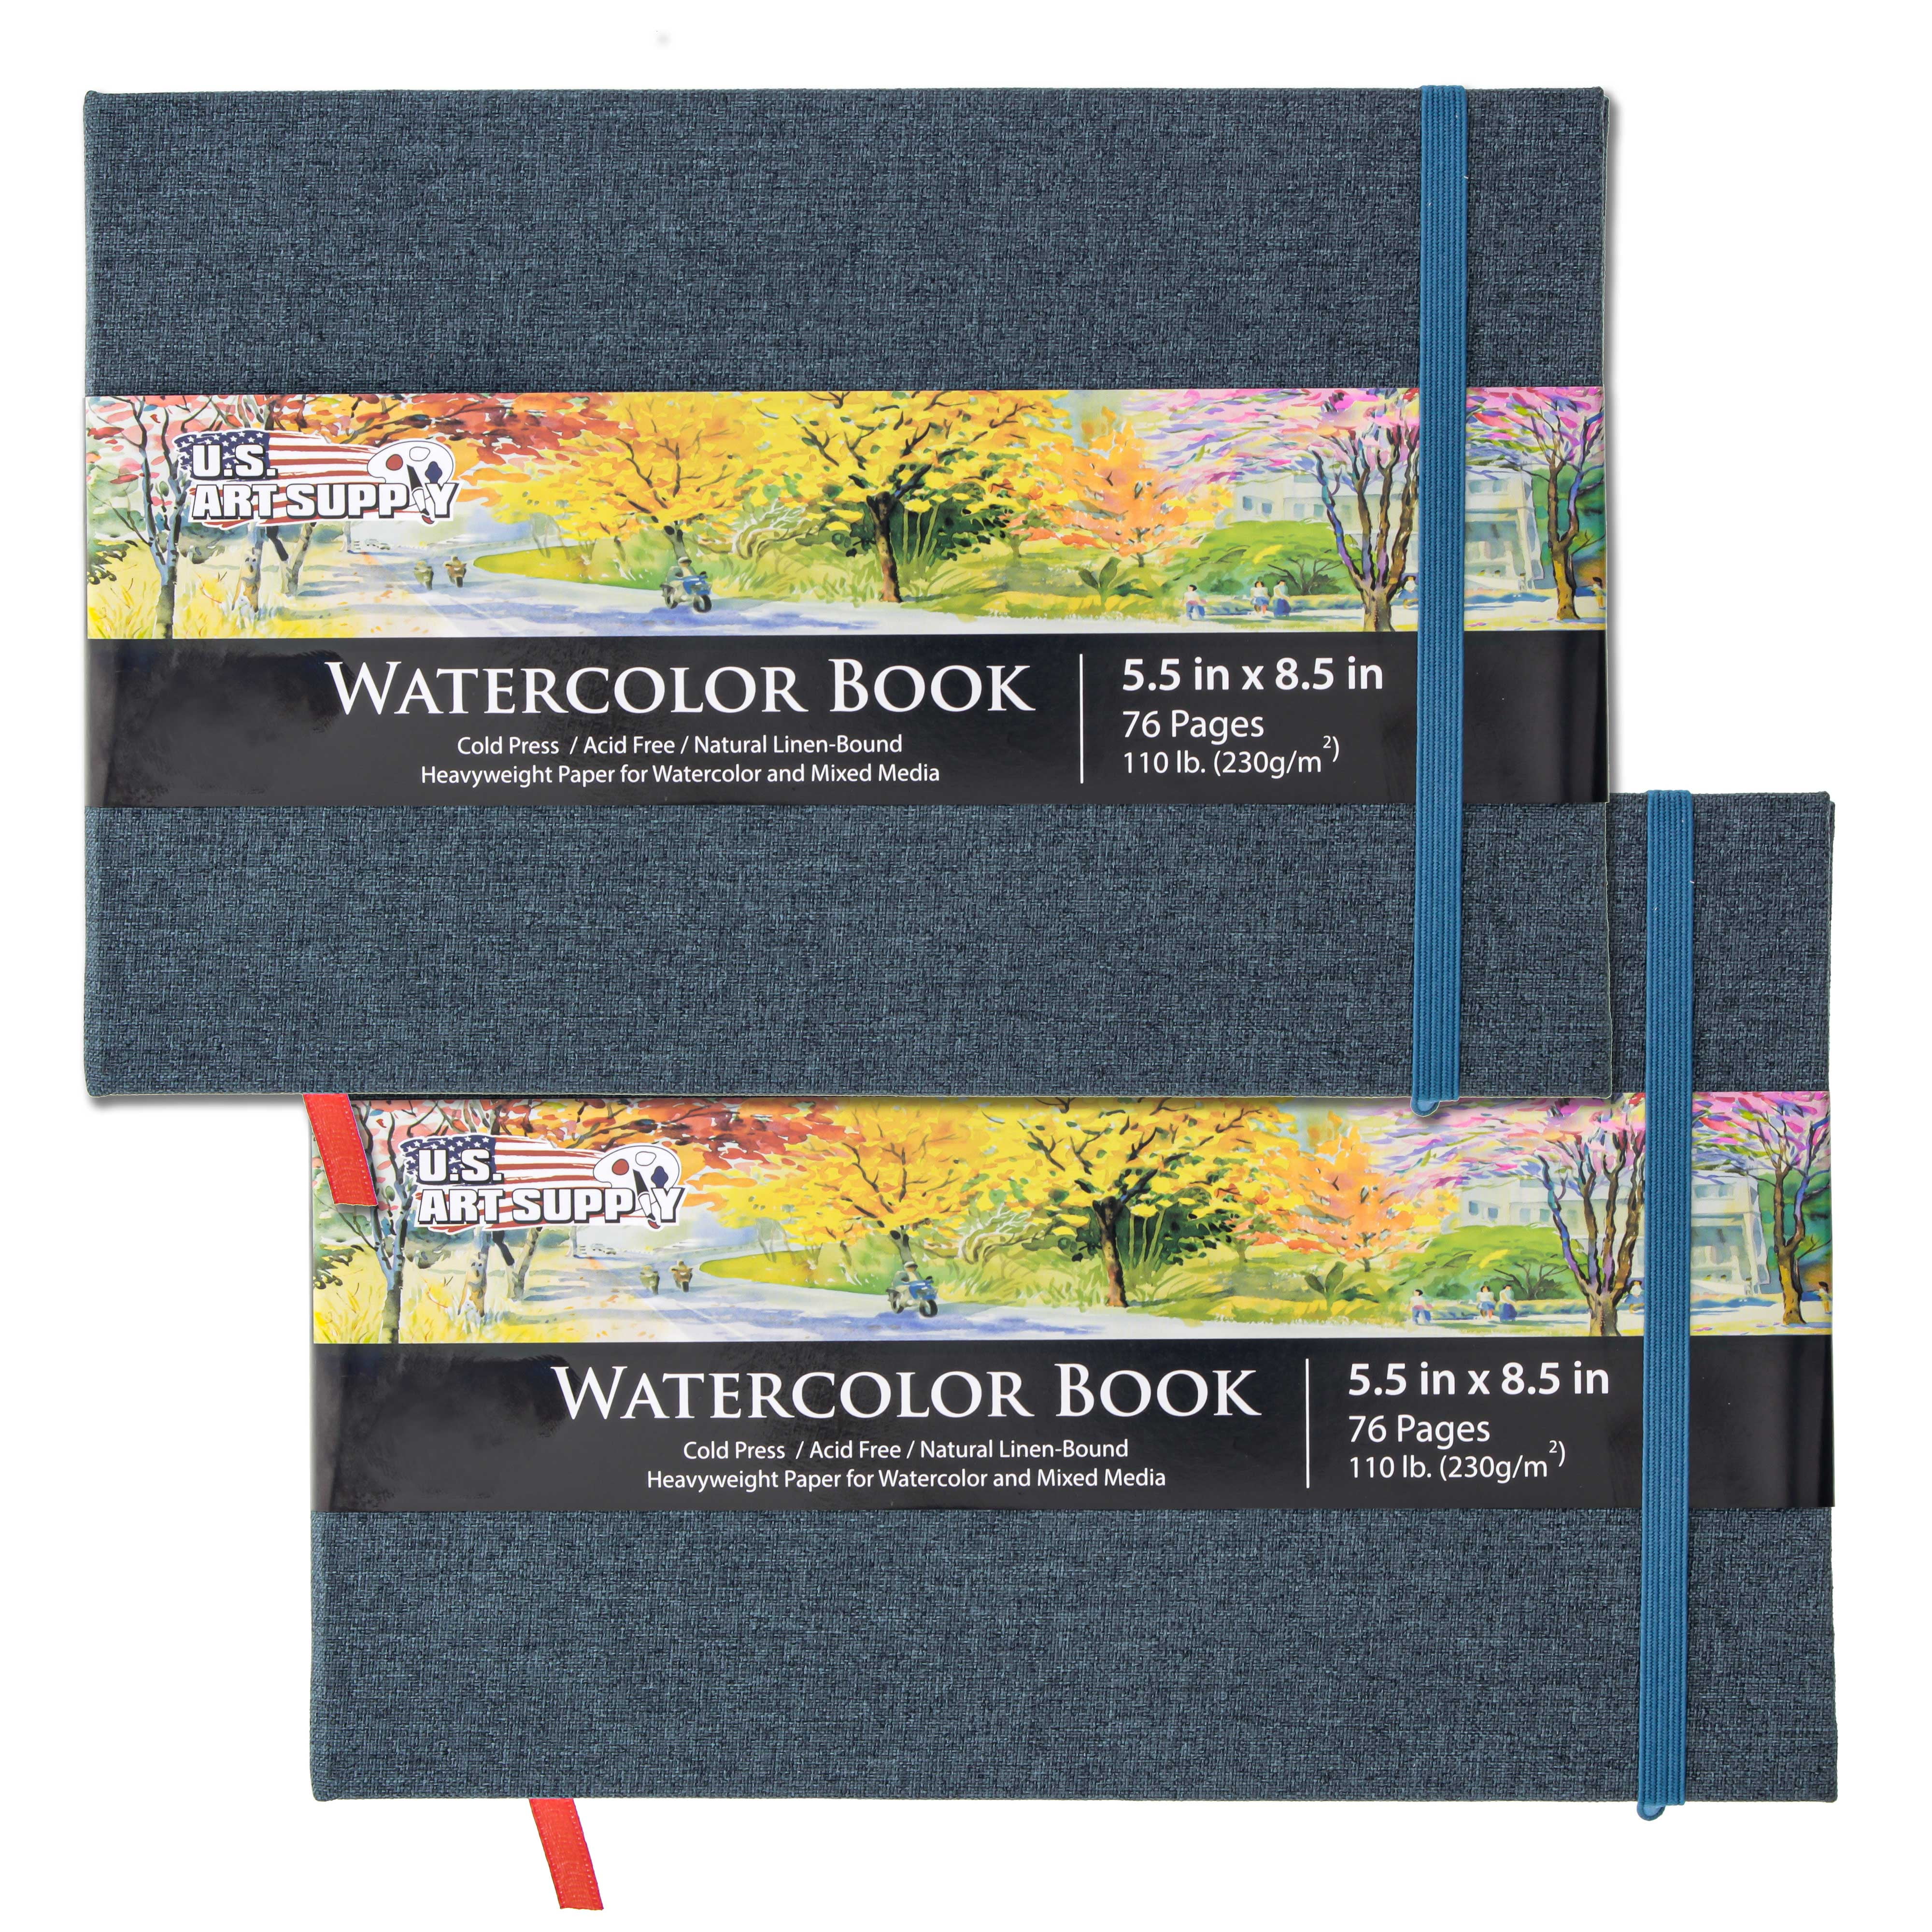 Canson Art Book All Media Watercolor Sketchbook 9 x 12 40 Sheets - Office  Depot